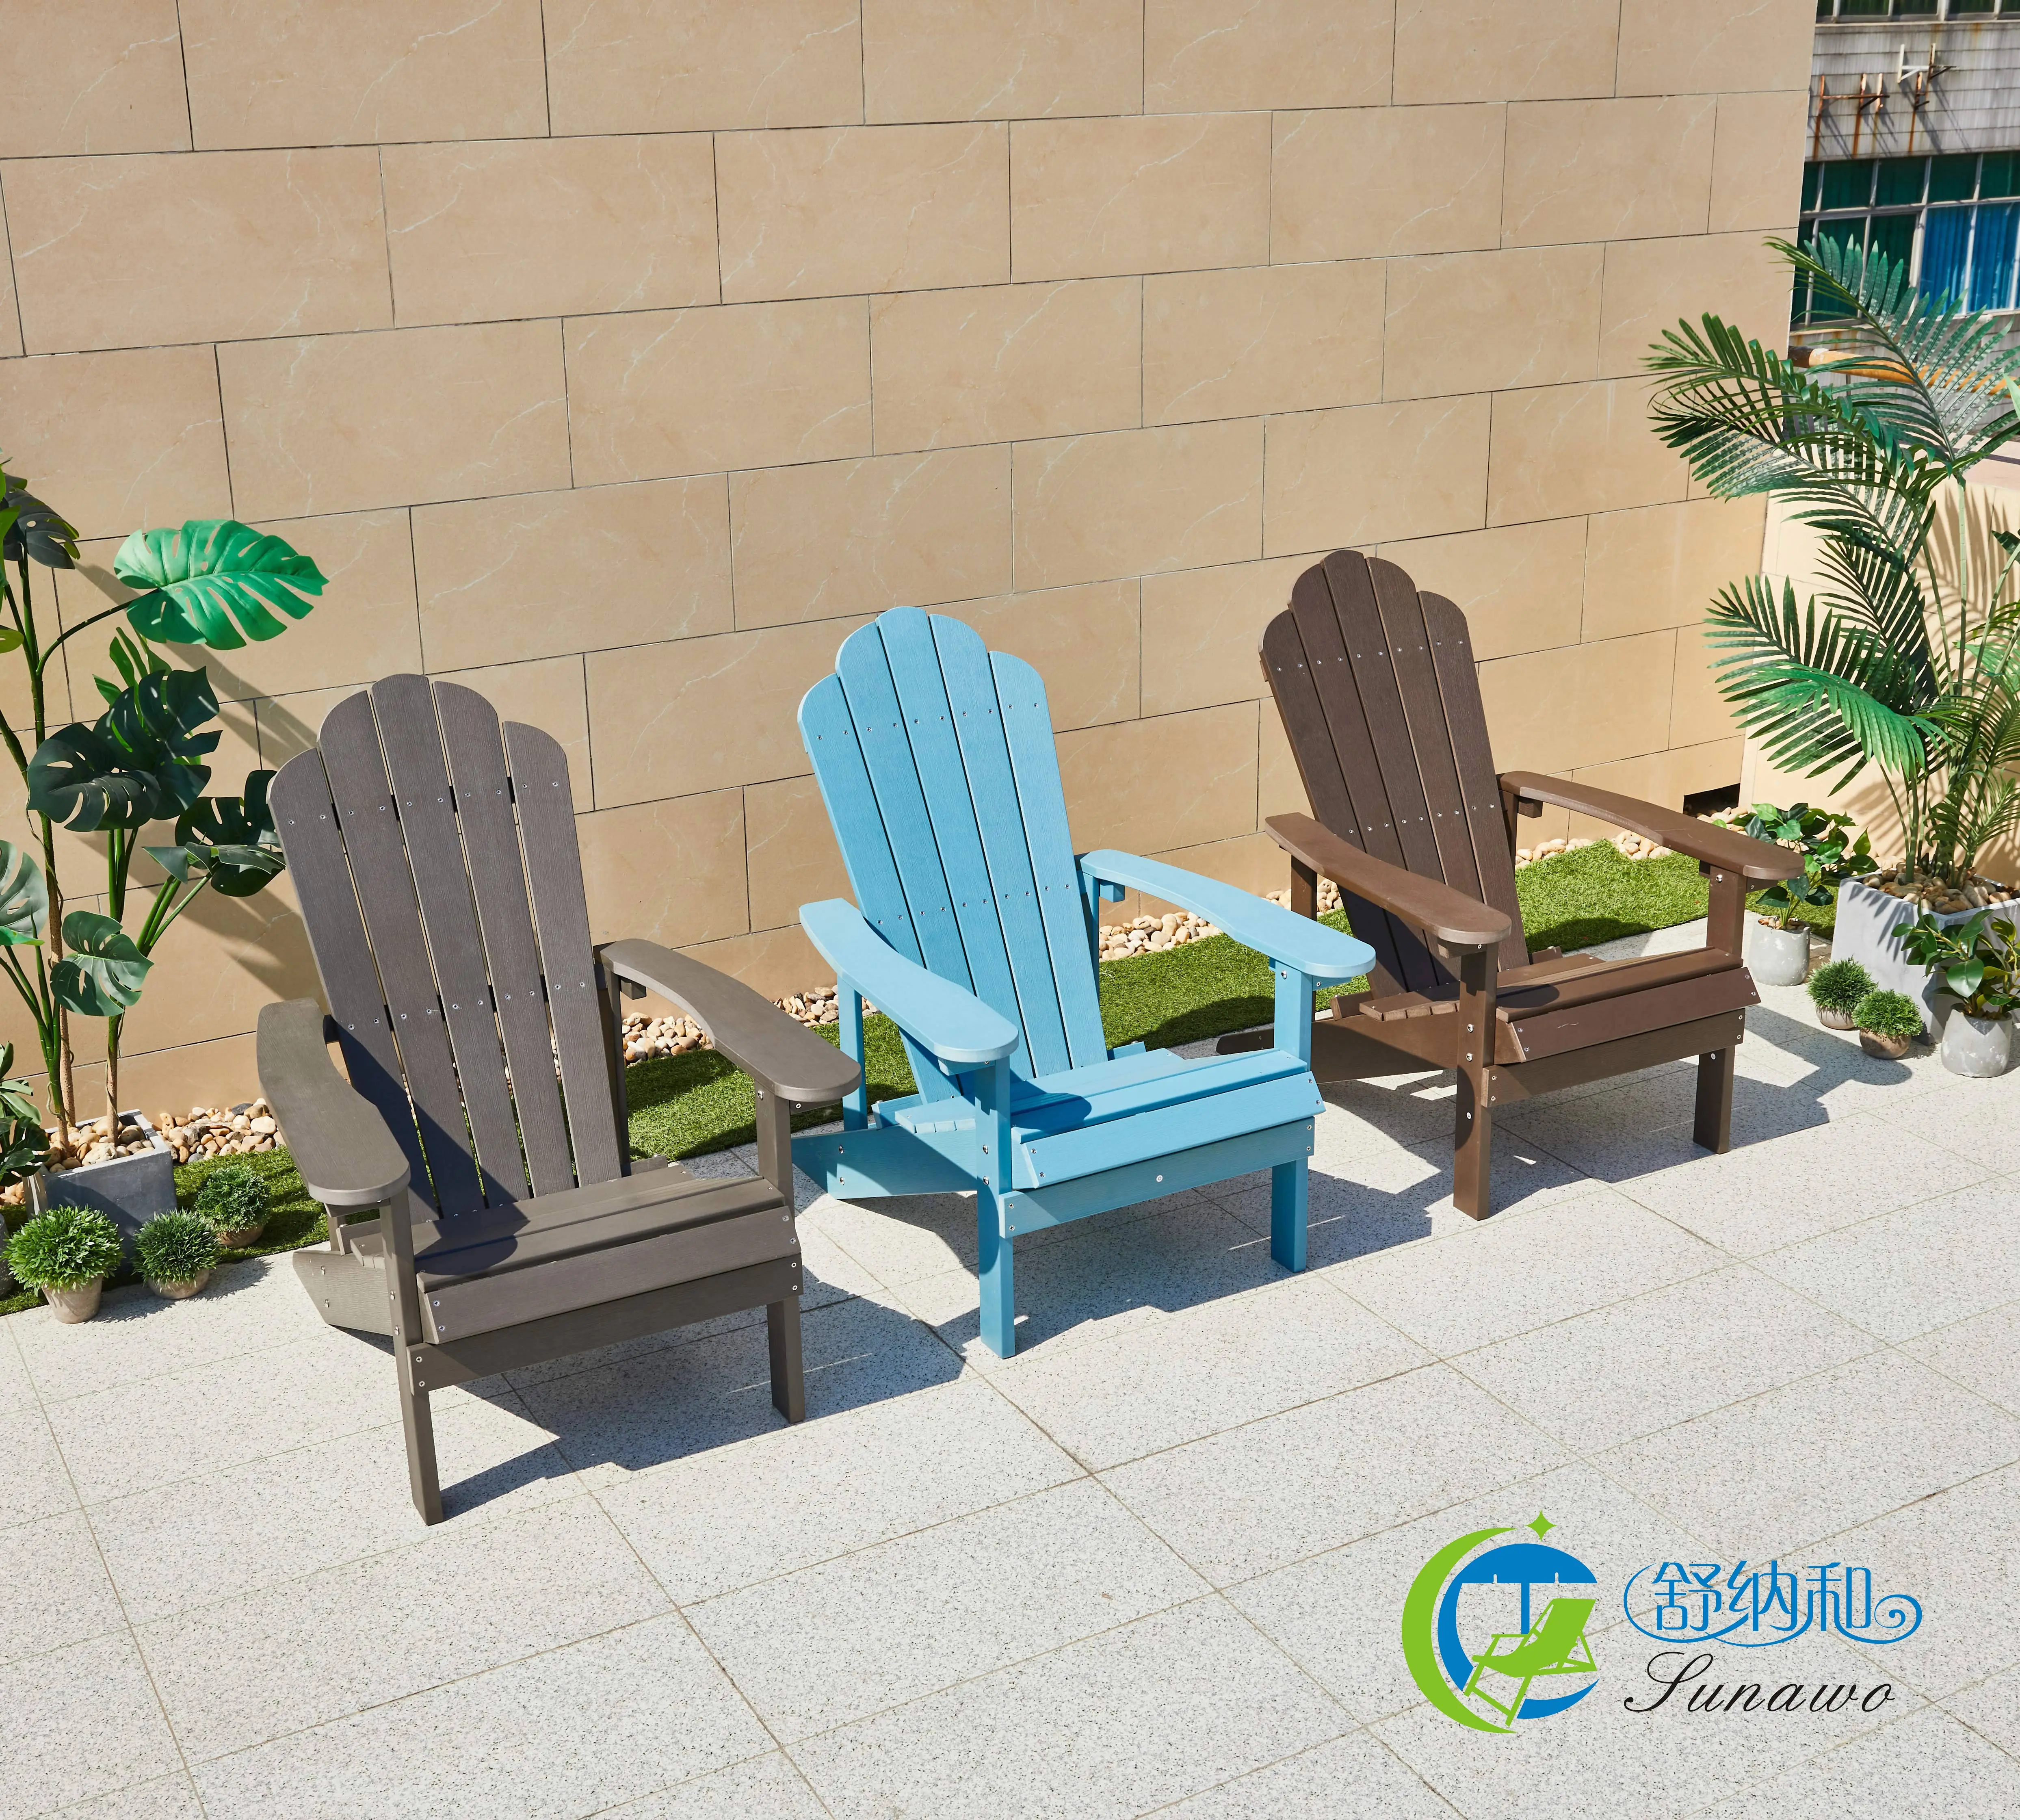 Factory direct supply new Light Plastic wood outdoor furniture garden set plastic resin chair